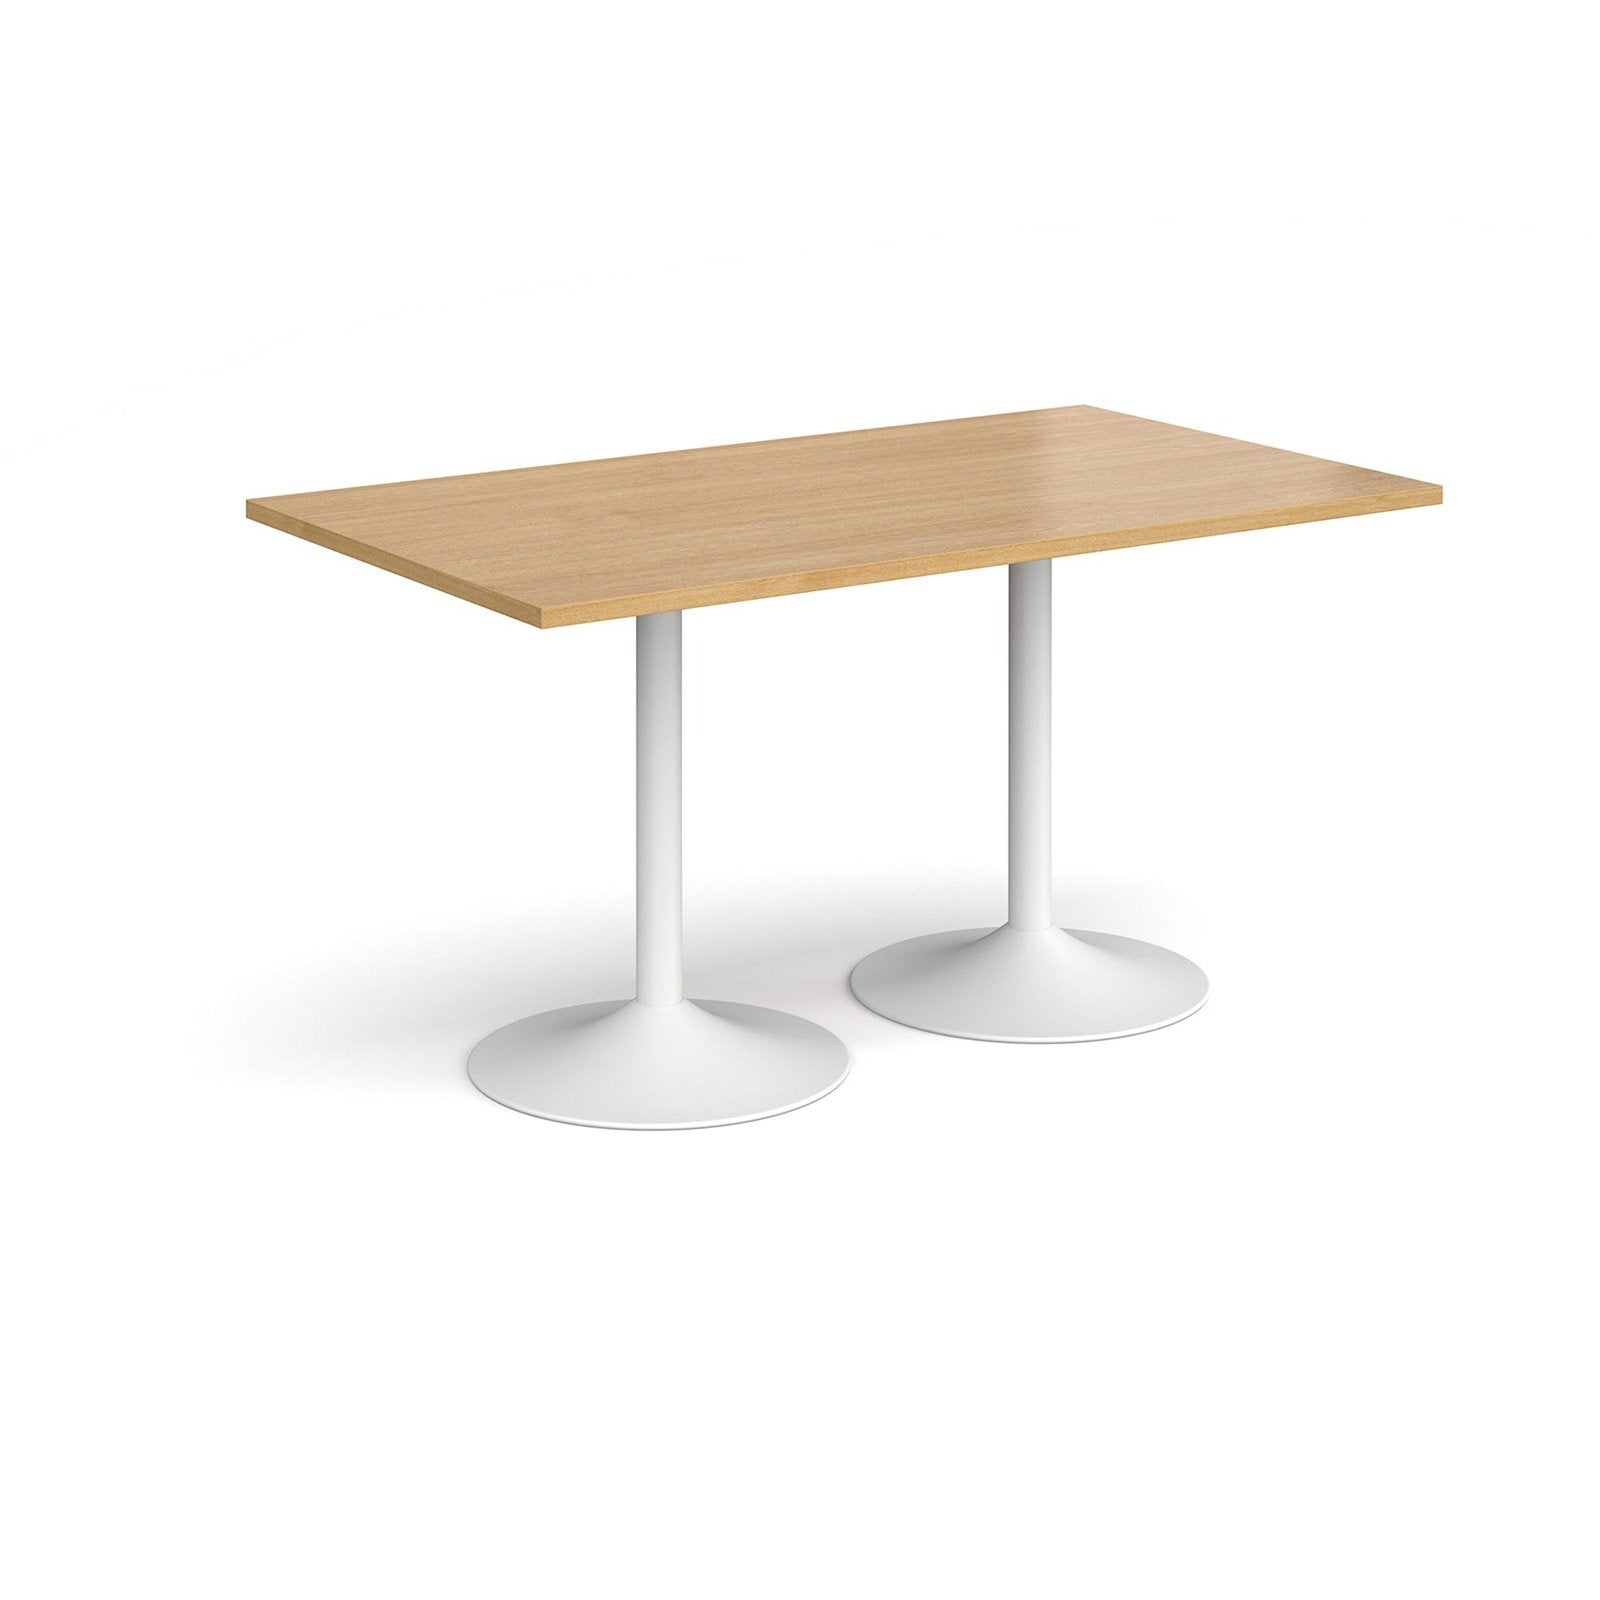 Genoa rectangular dining table with trumpet base - Office Products Online